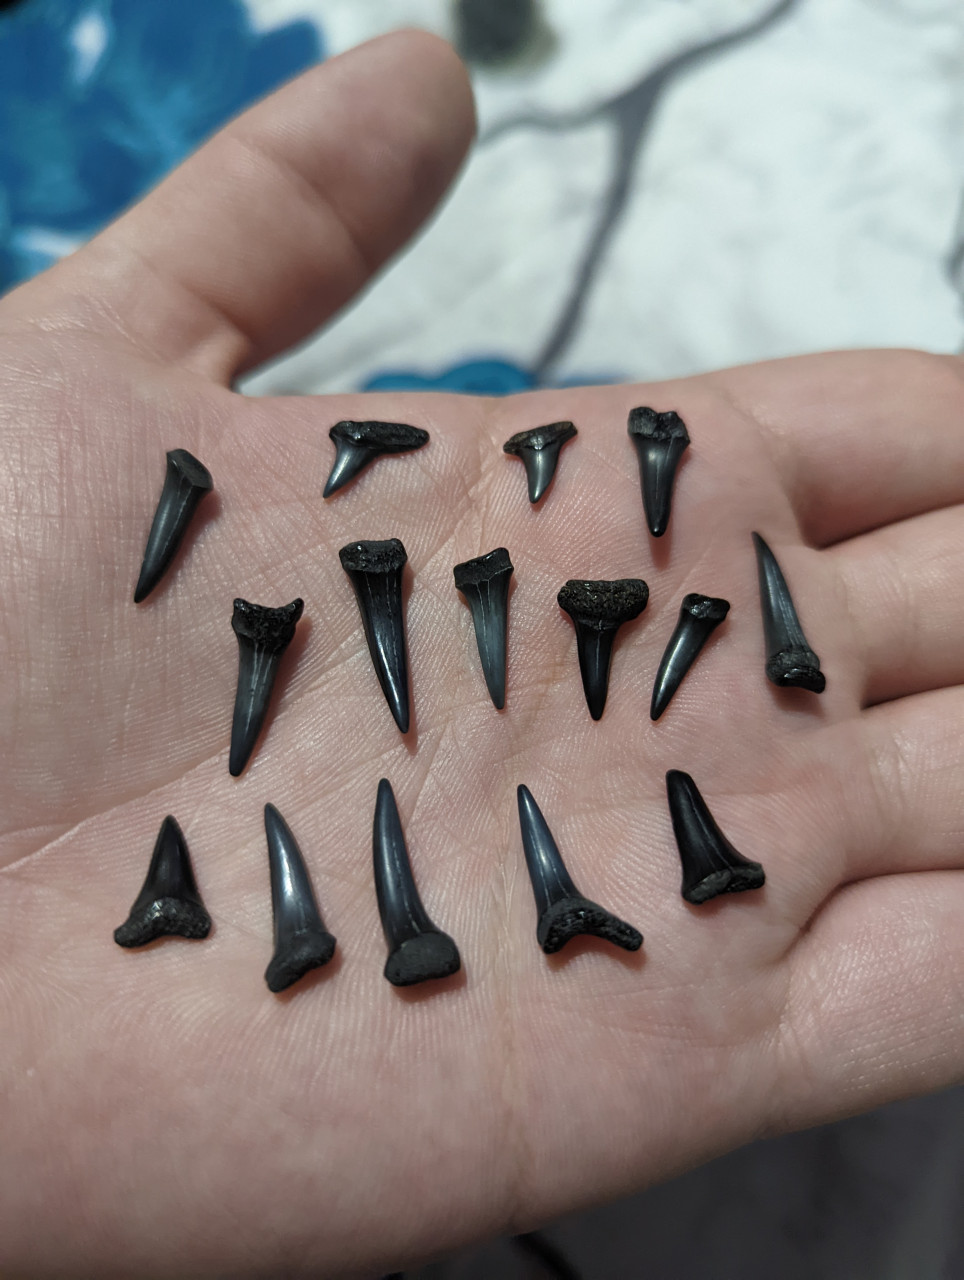 Find Shark Teeth at Myrtle Beach Every Time! 